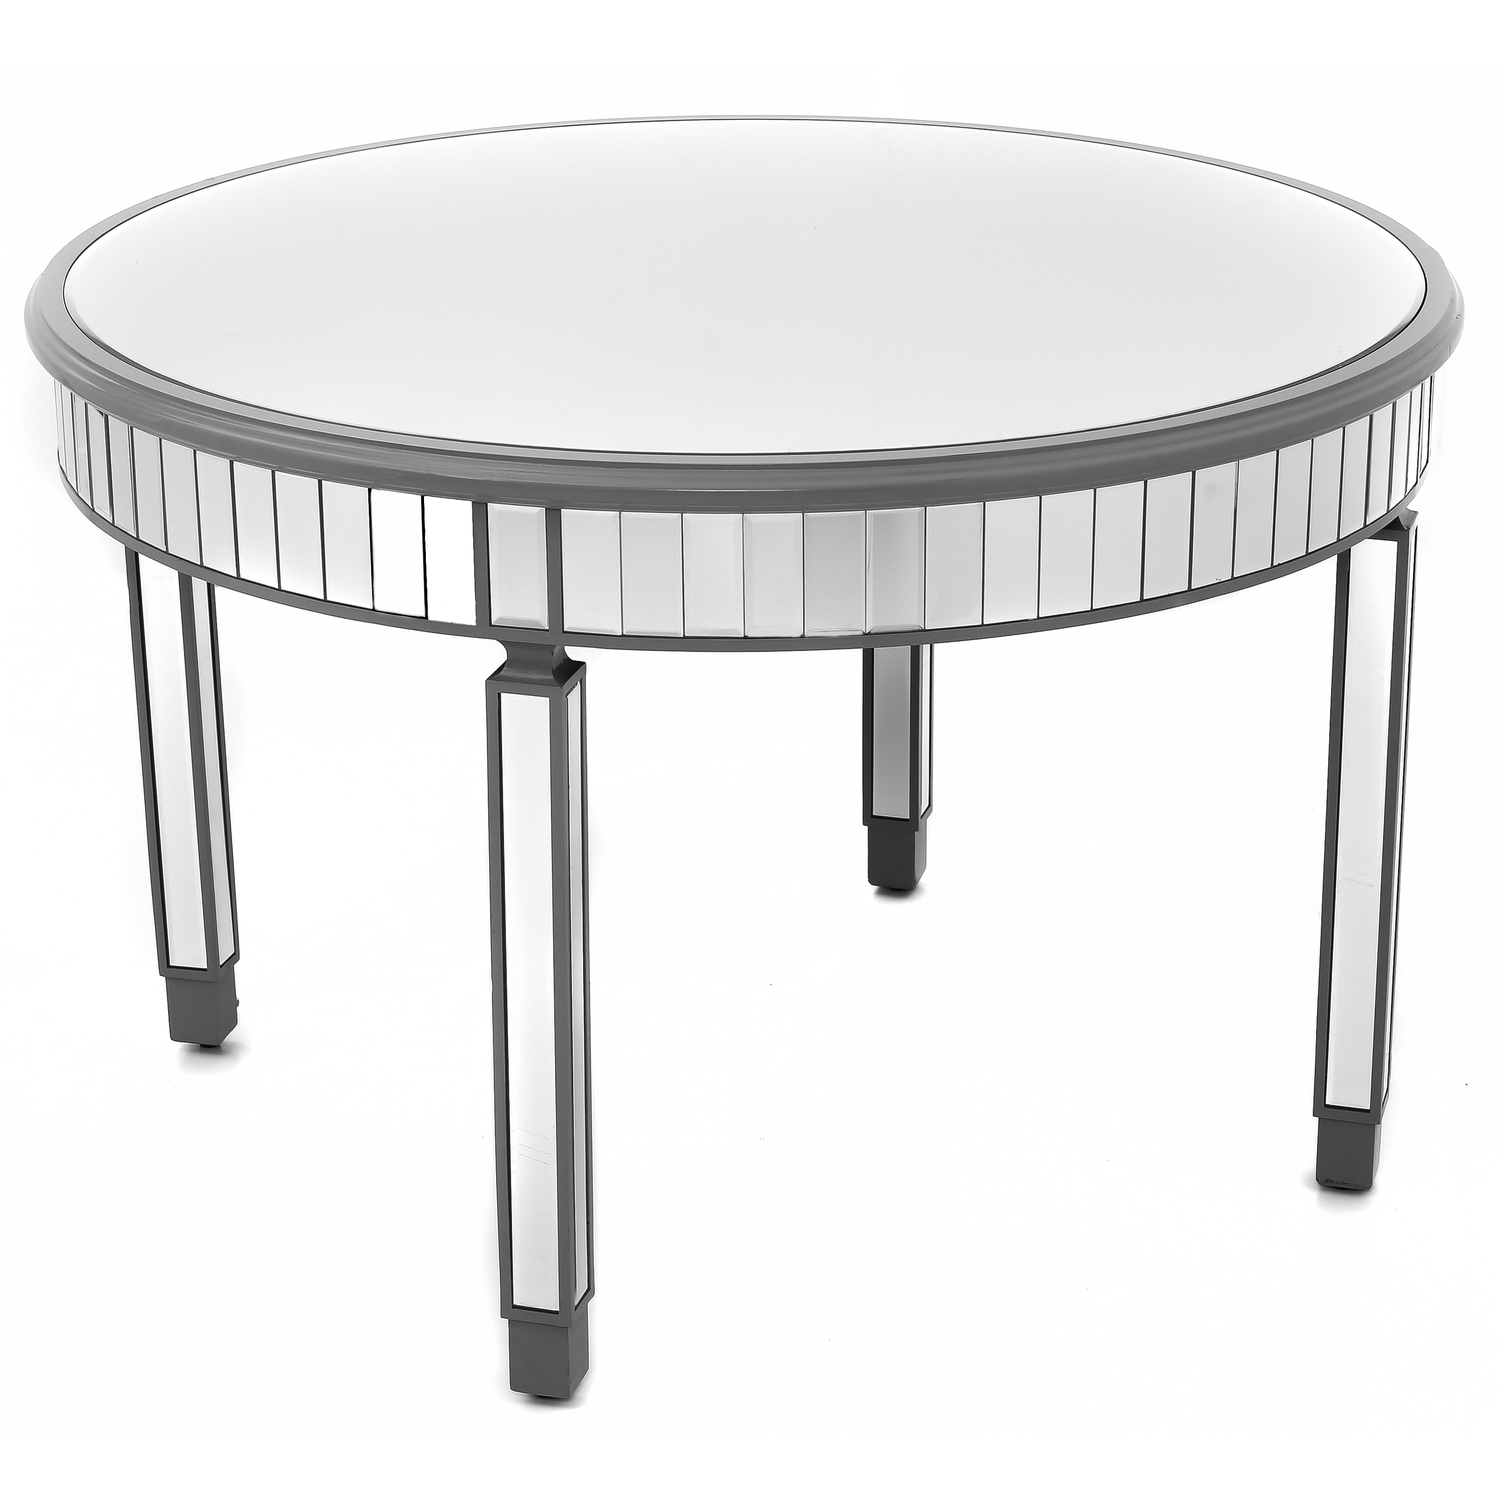 Paloma Collection Mirrored Round Dining Table